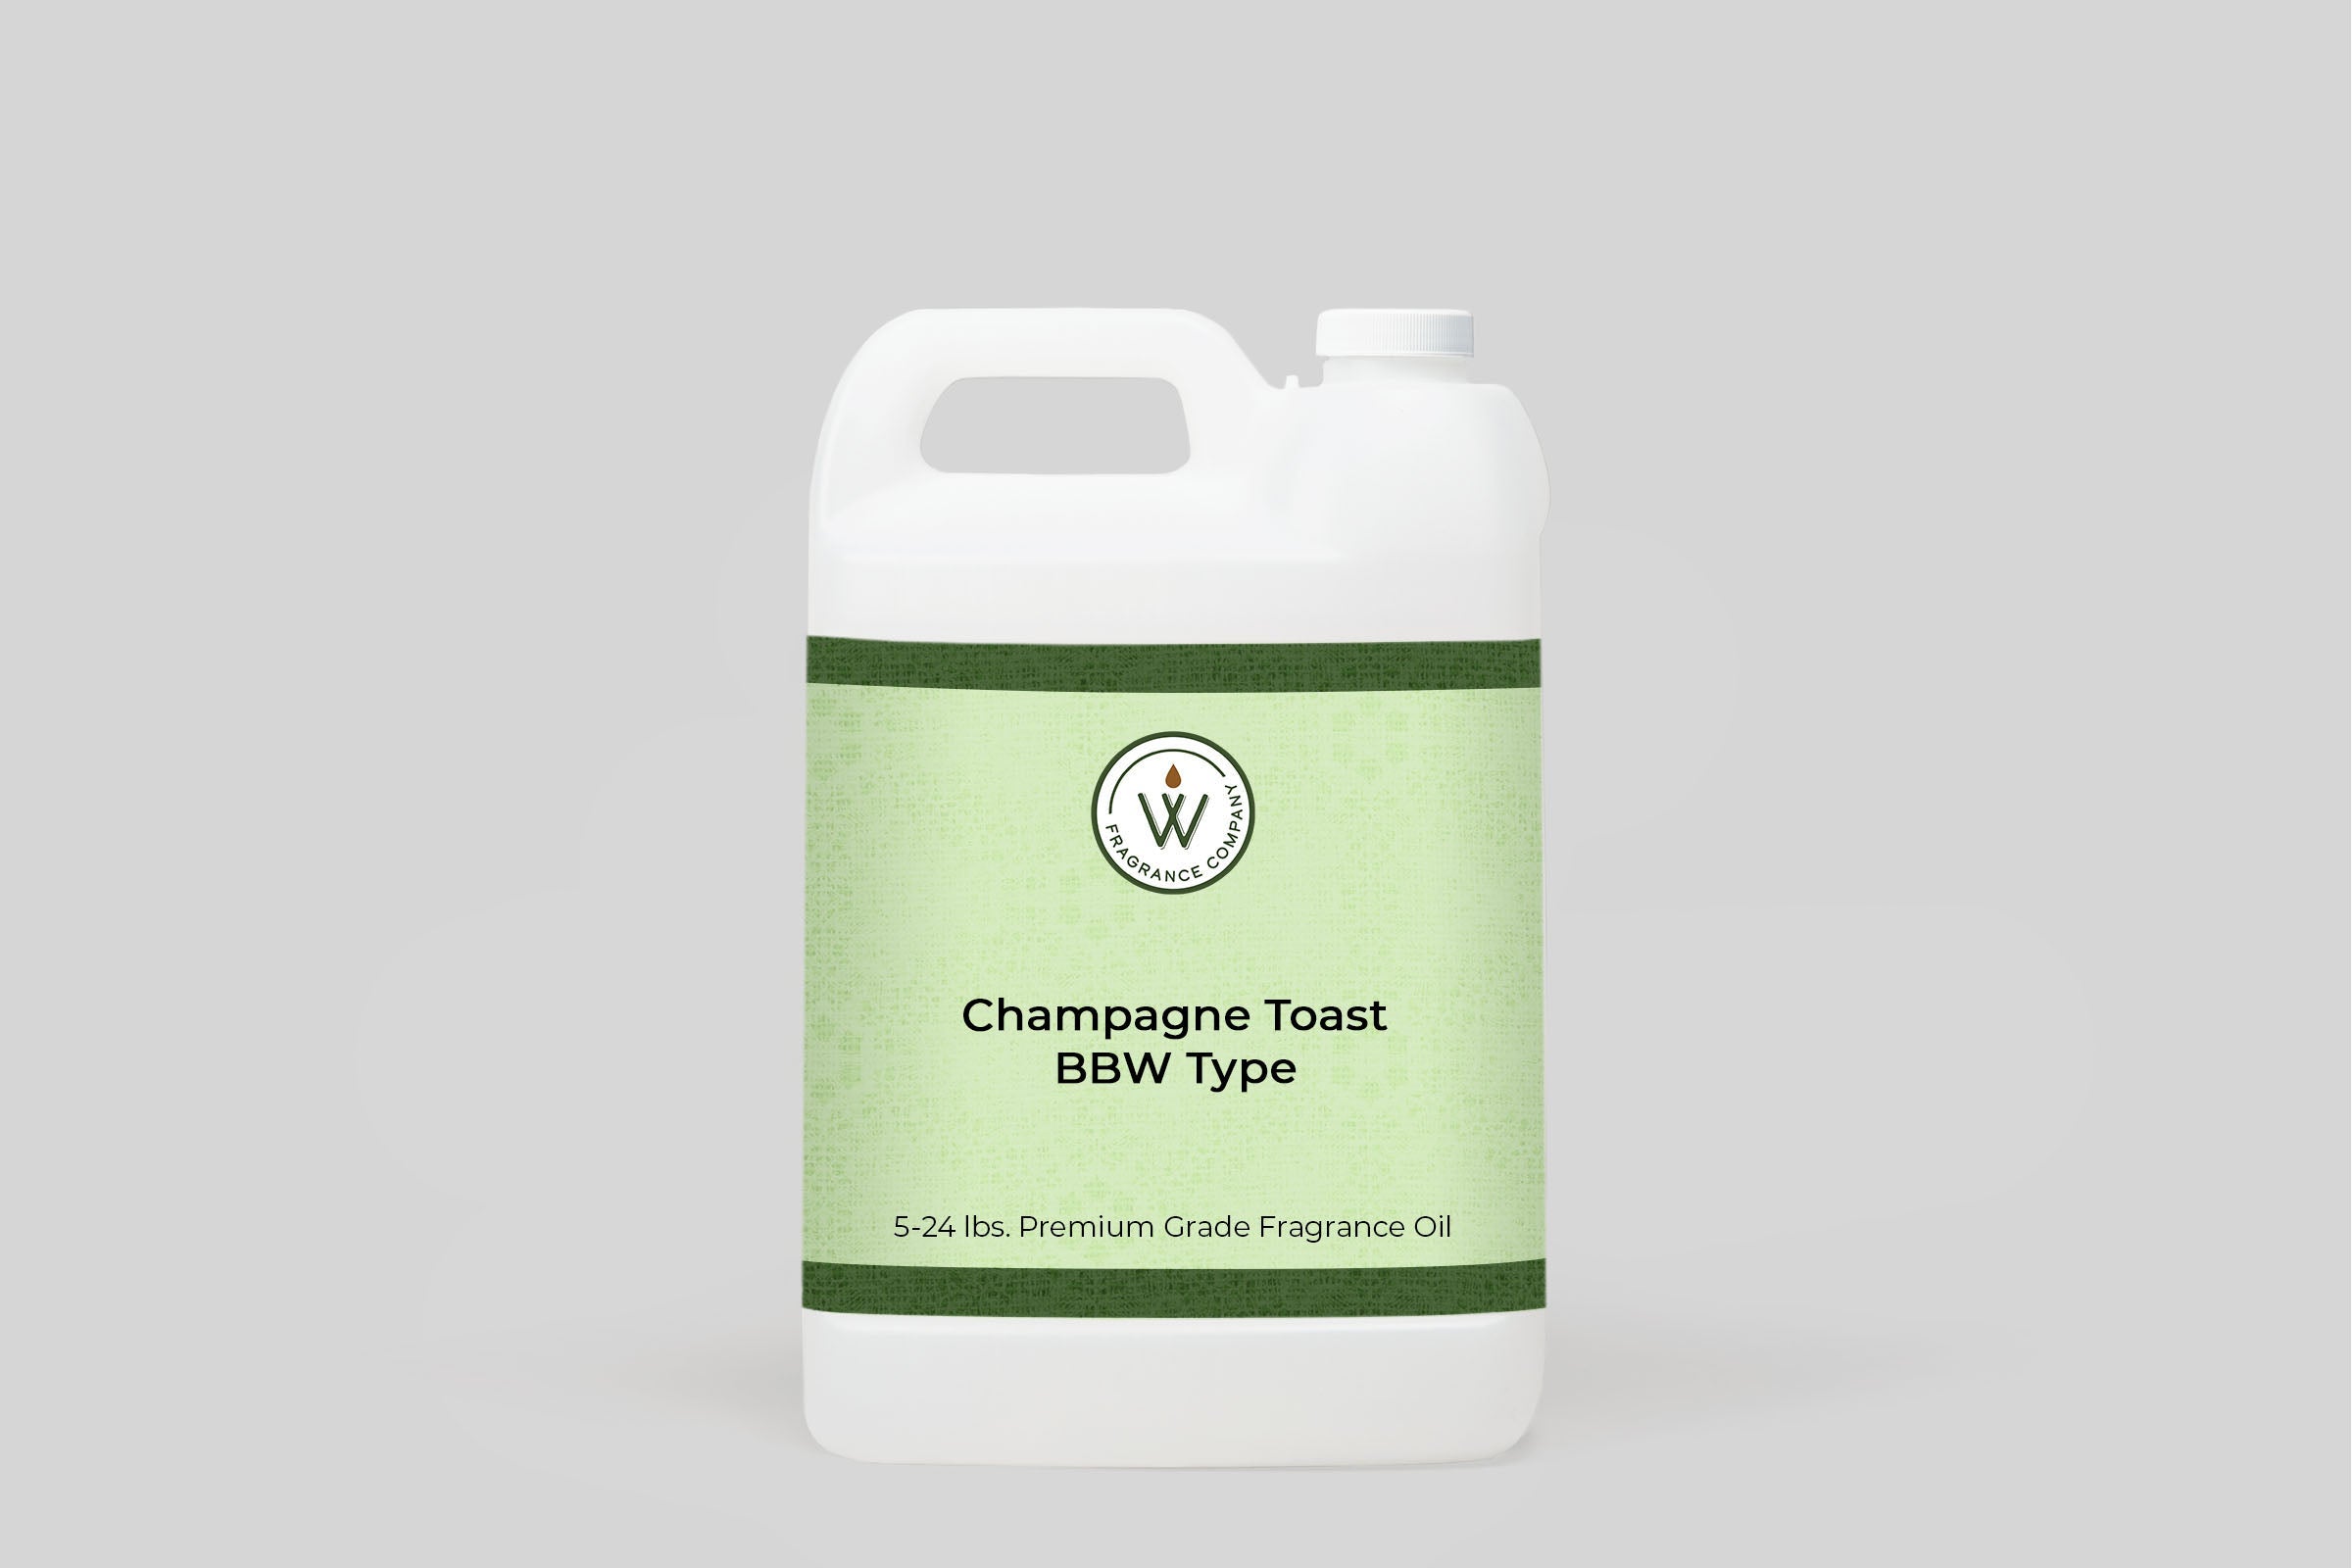 Champagne Toast BBW Type Fragrance Oil